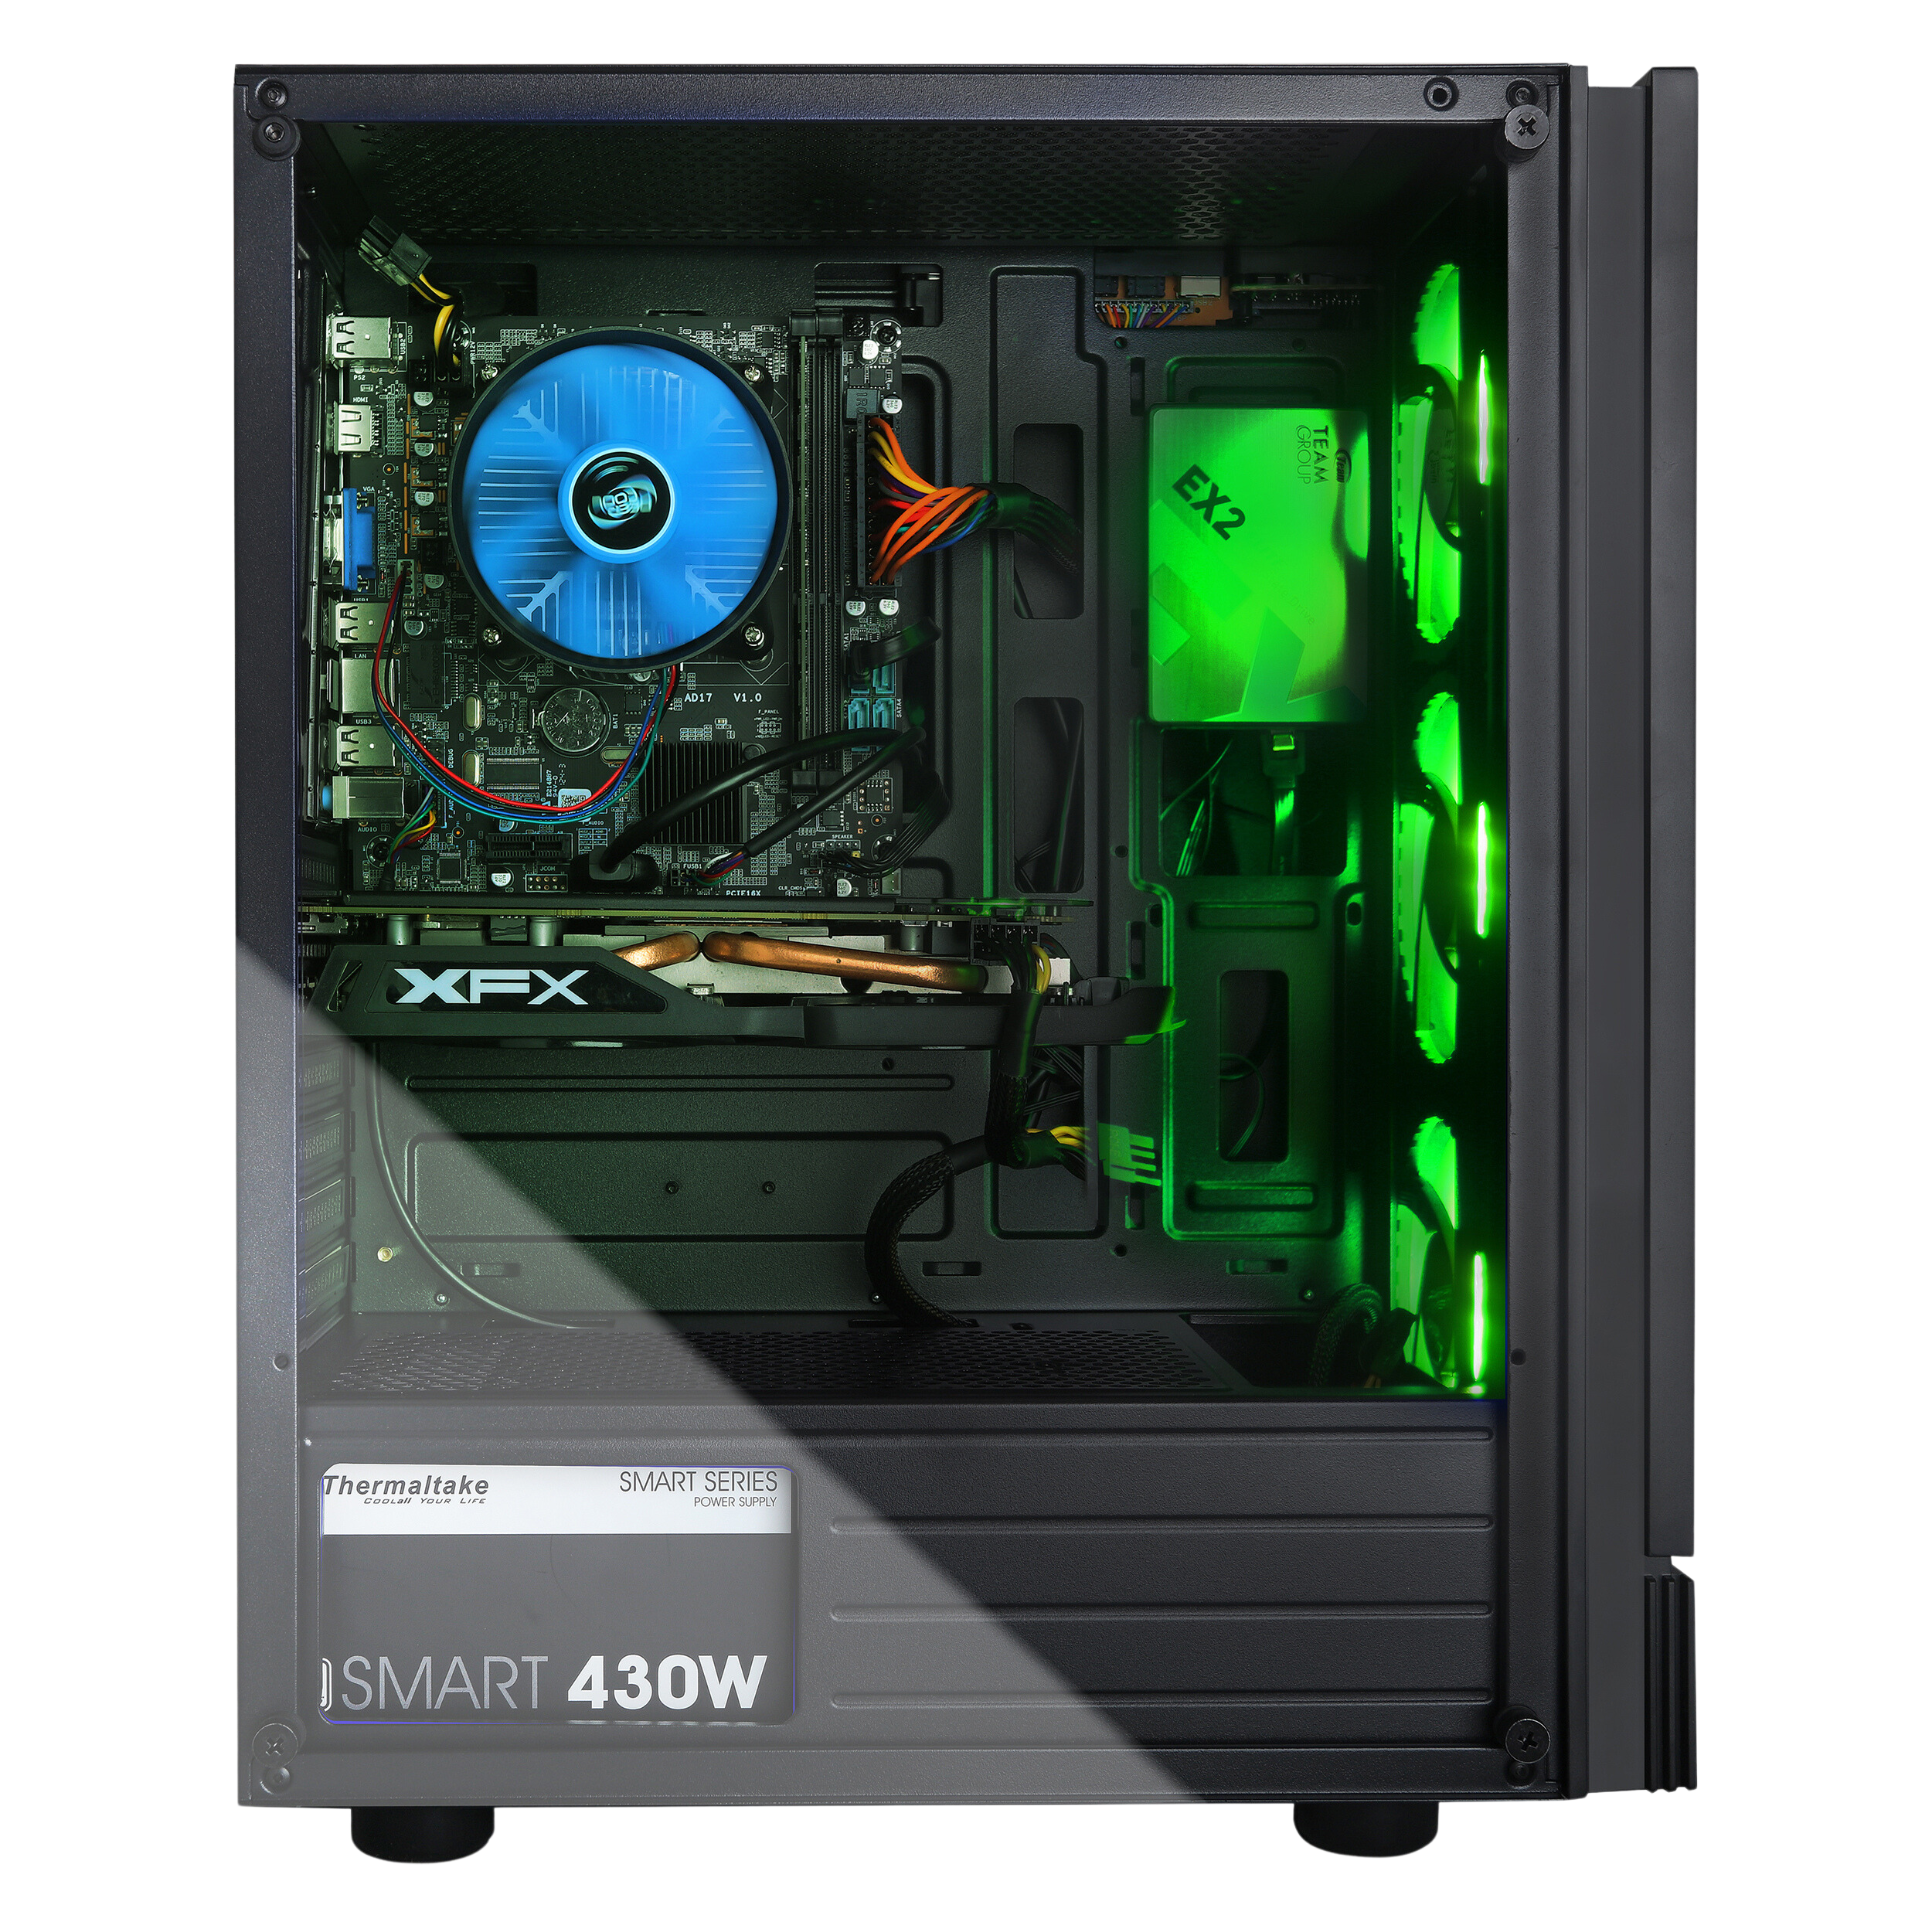 Internal view of a gaming PC with green LED lighting and cooling fan.